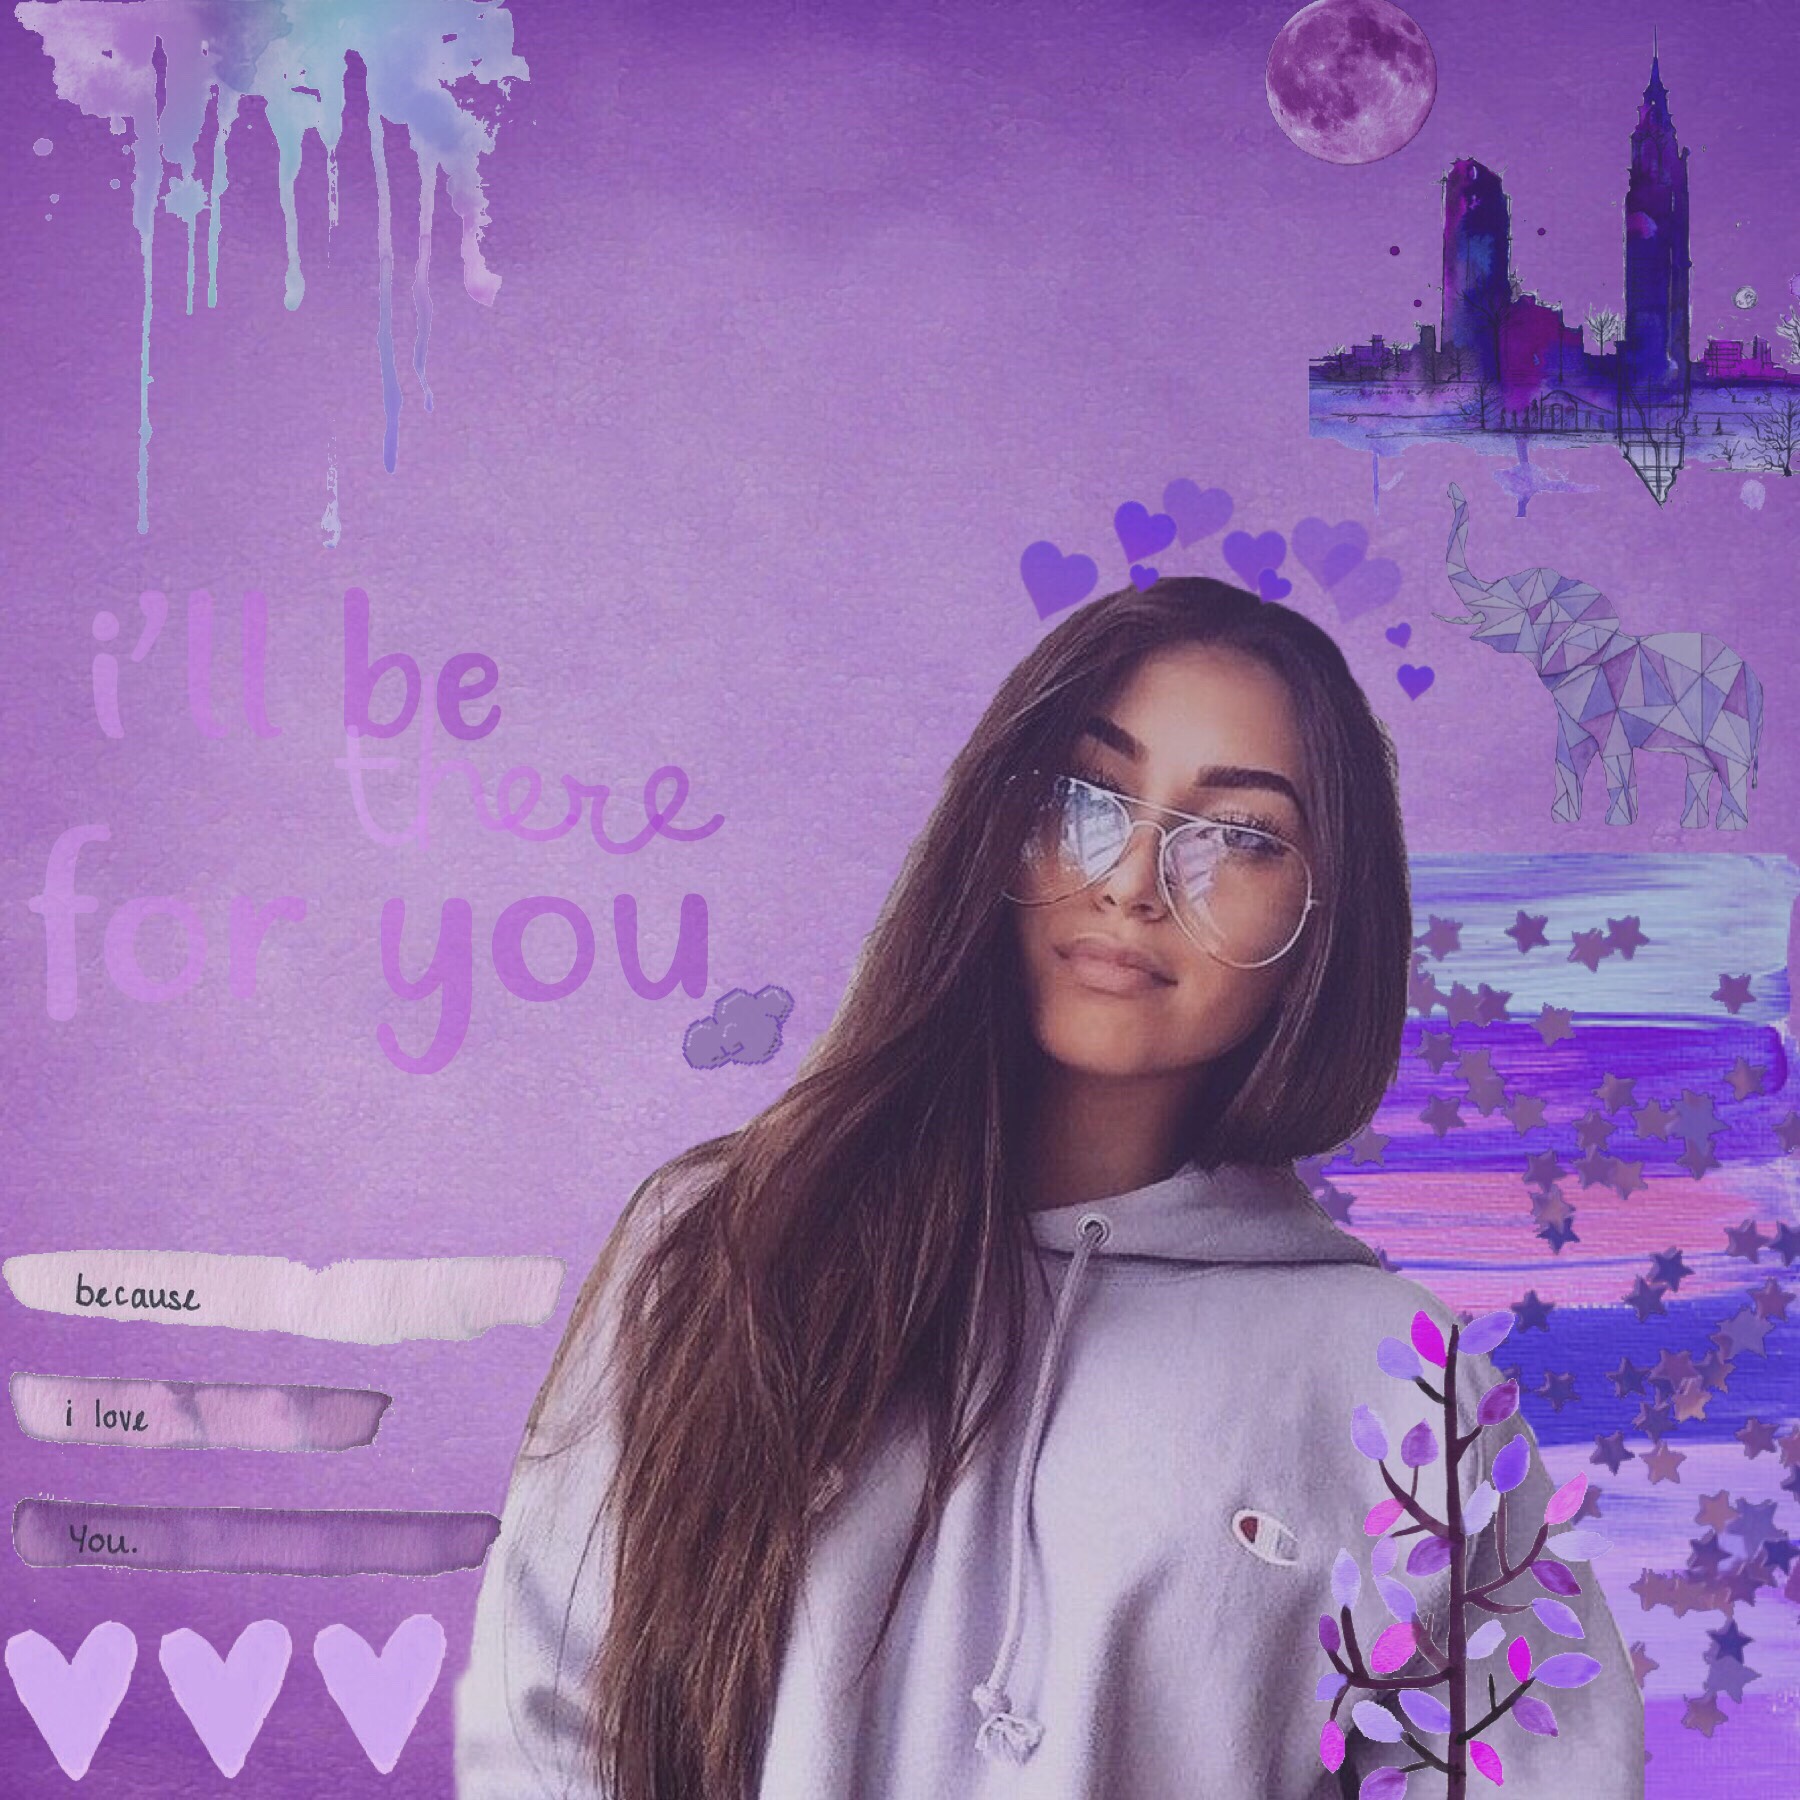 💜tap💜

heyyyy second post of the theme what do you think??